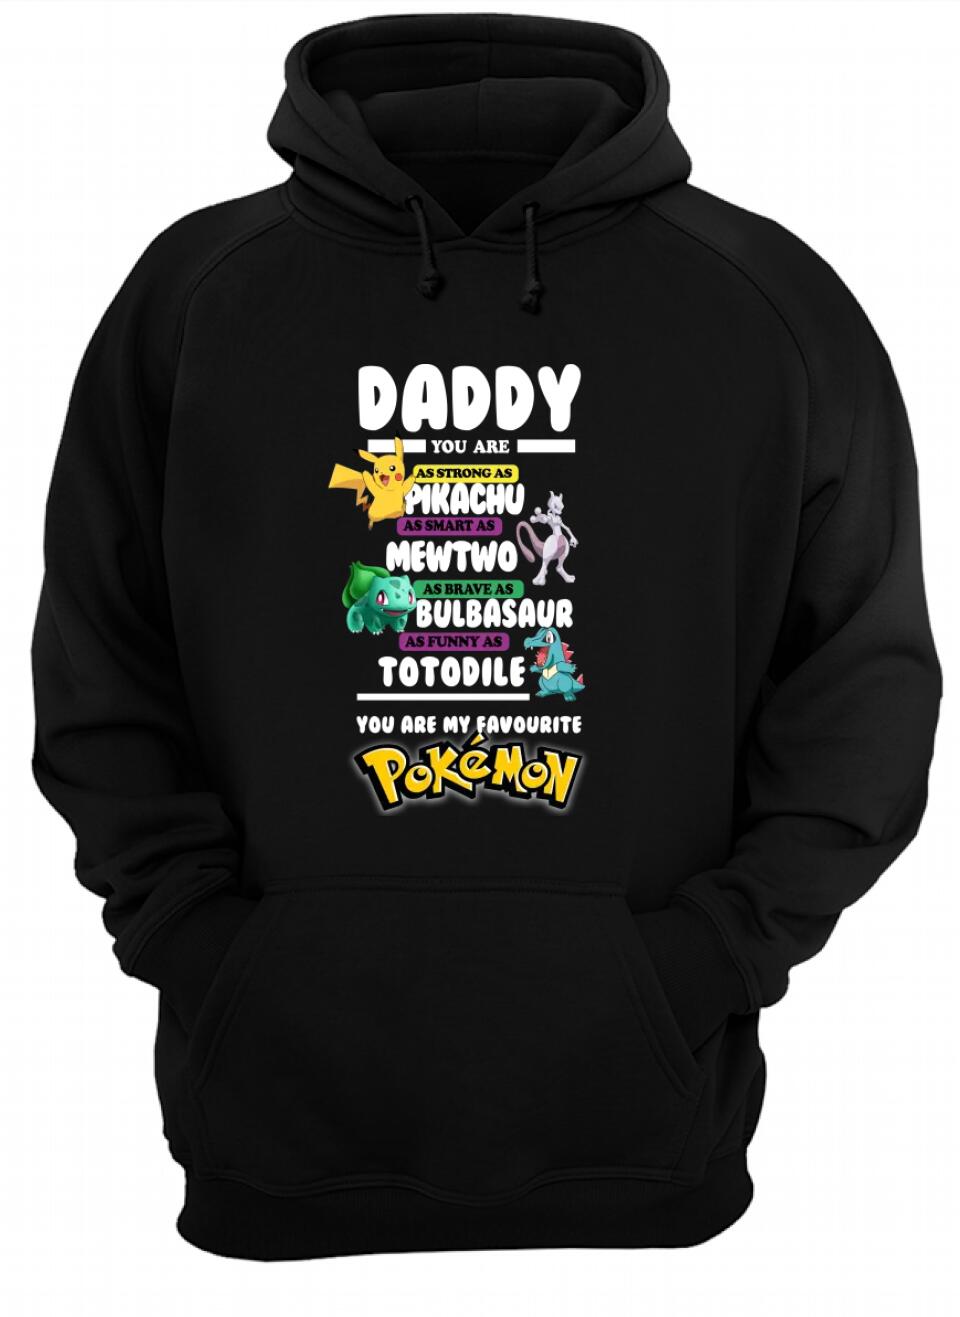 Pokemon - Daddy you are